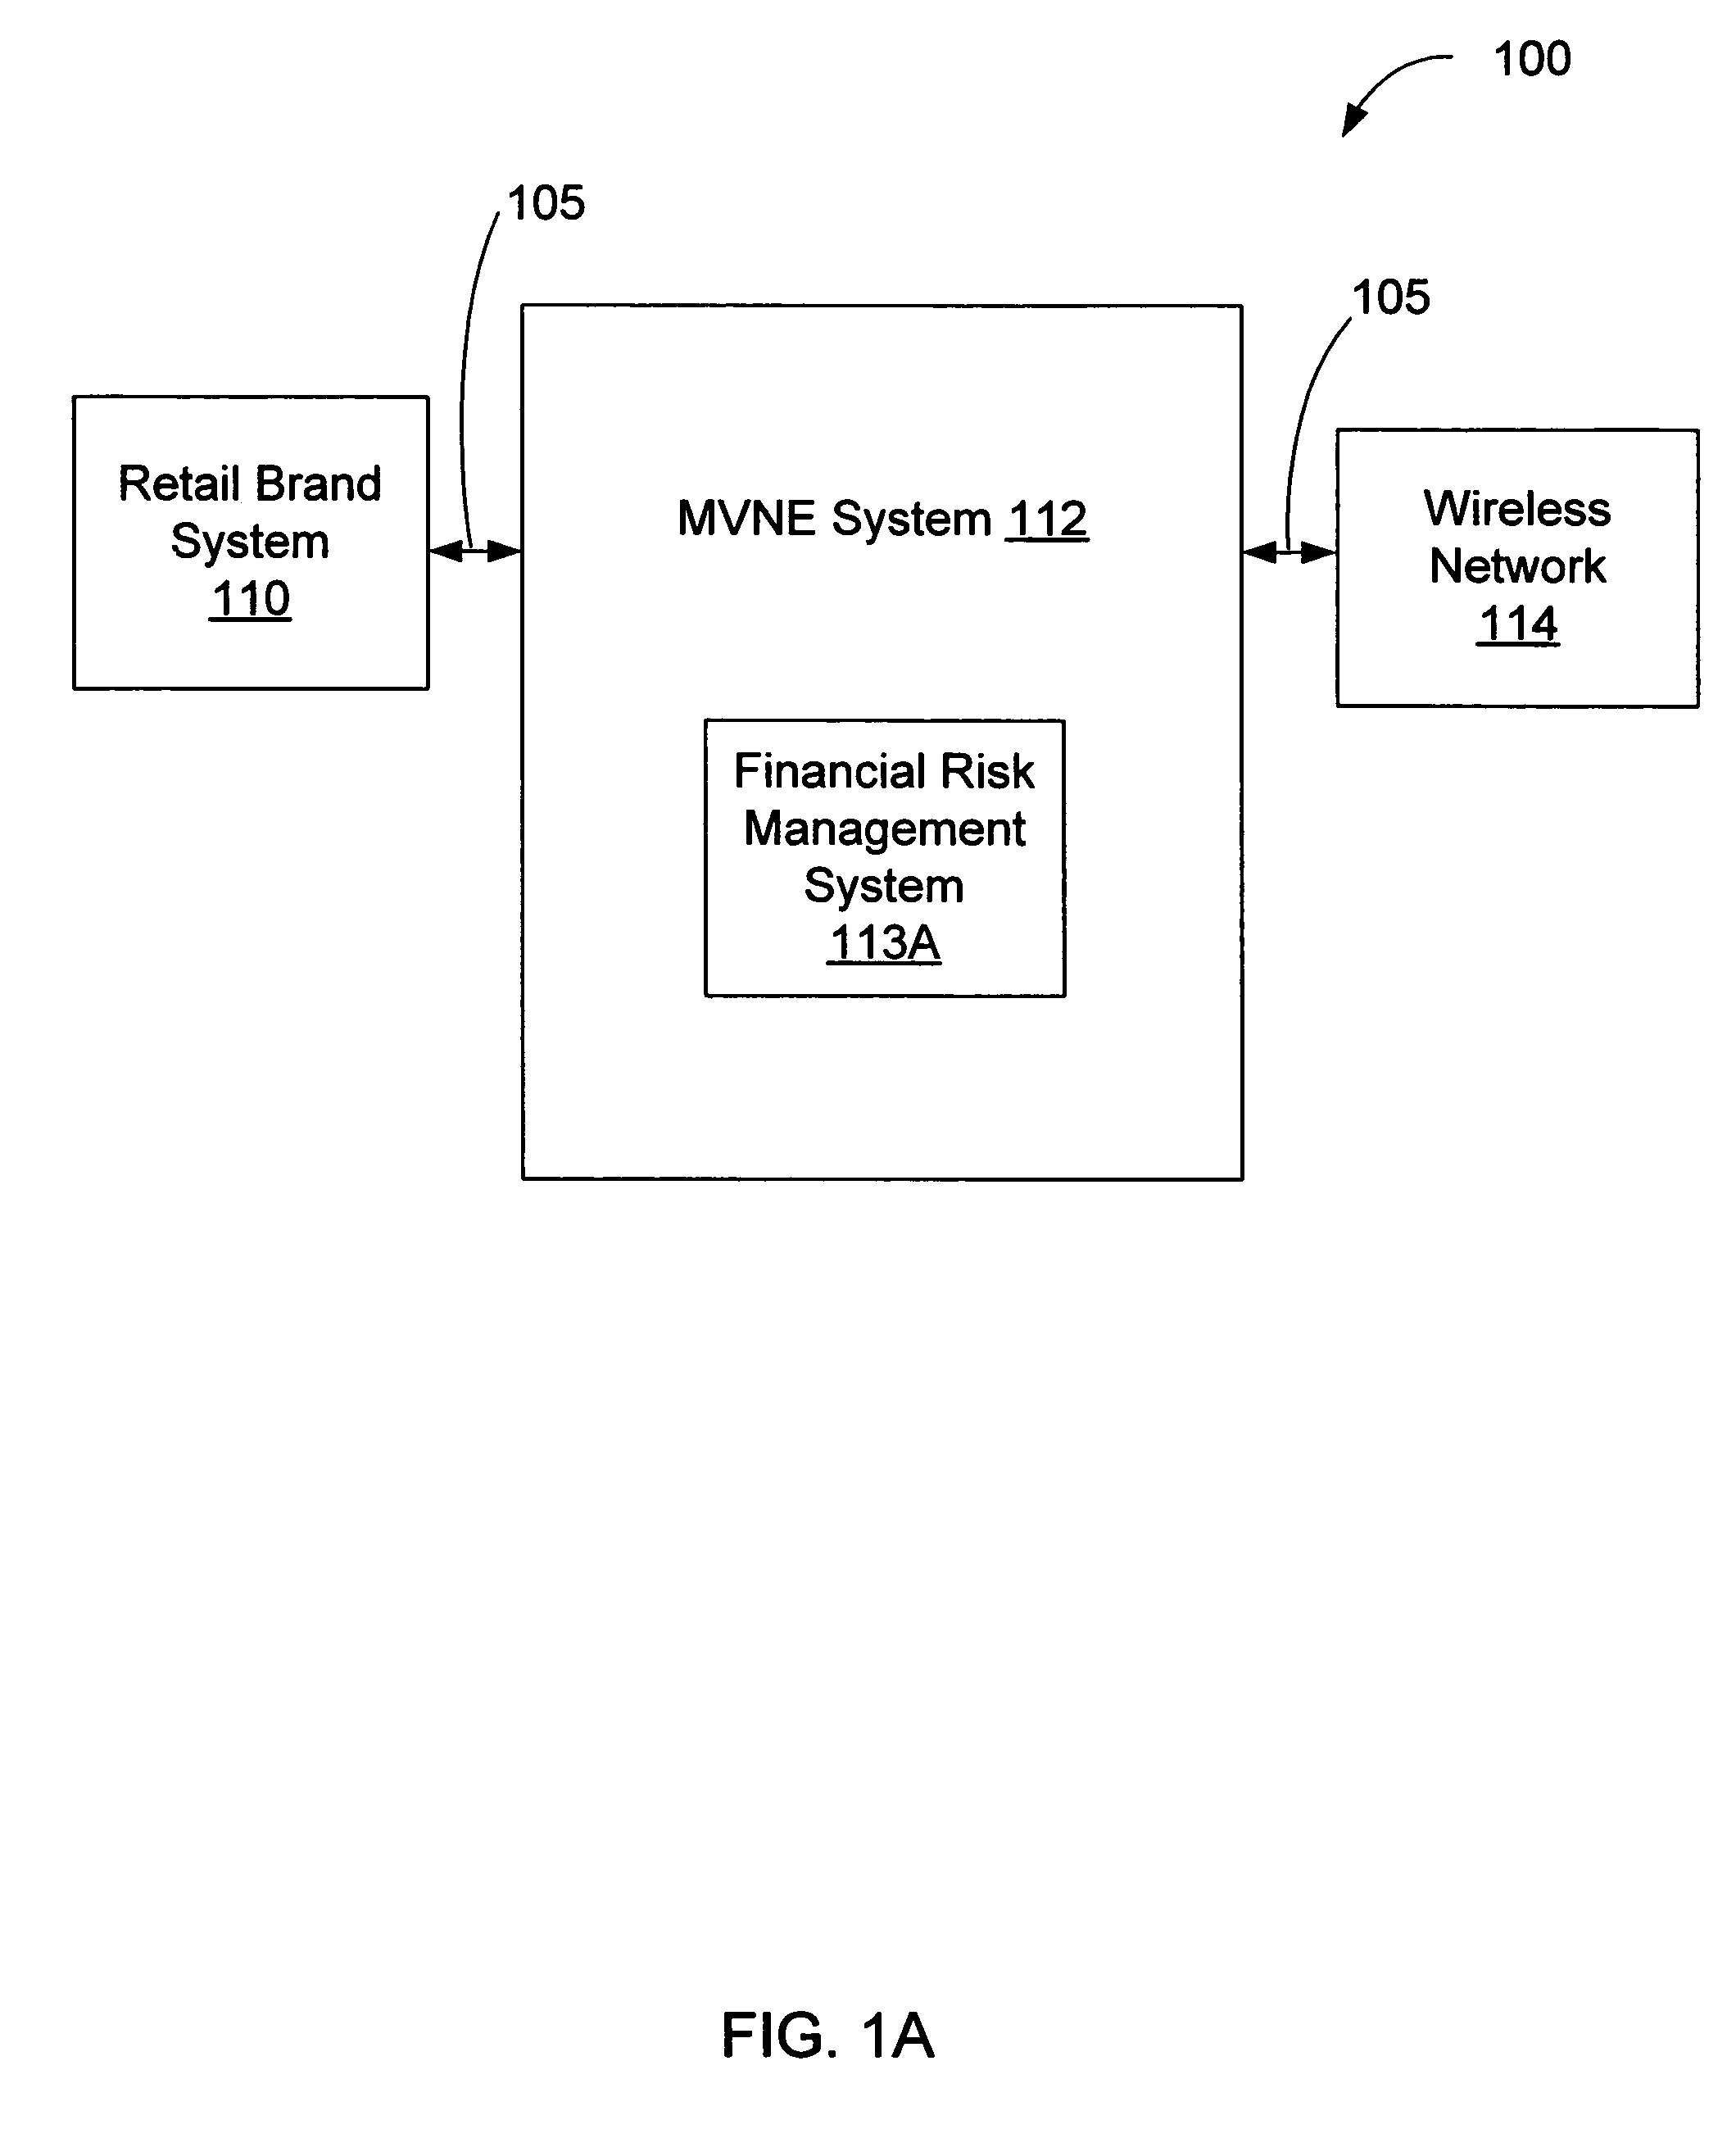 Method for minimizing financial risk for wireless services